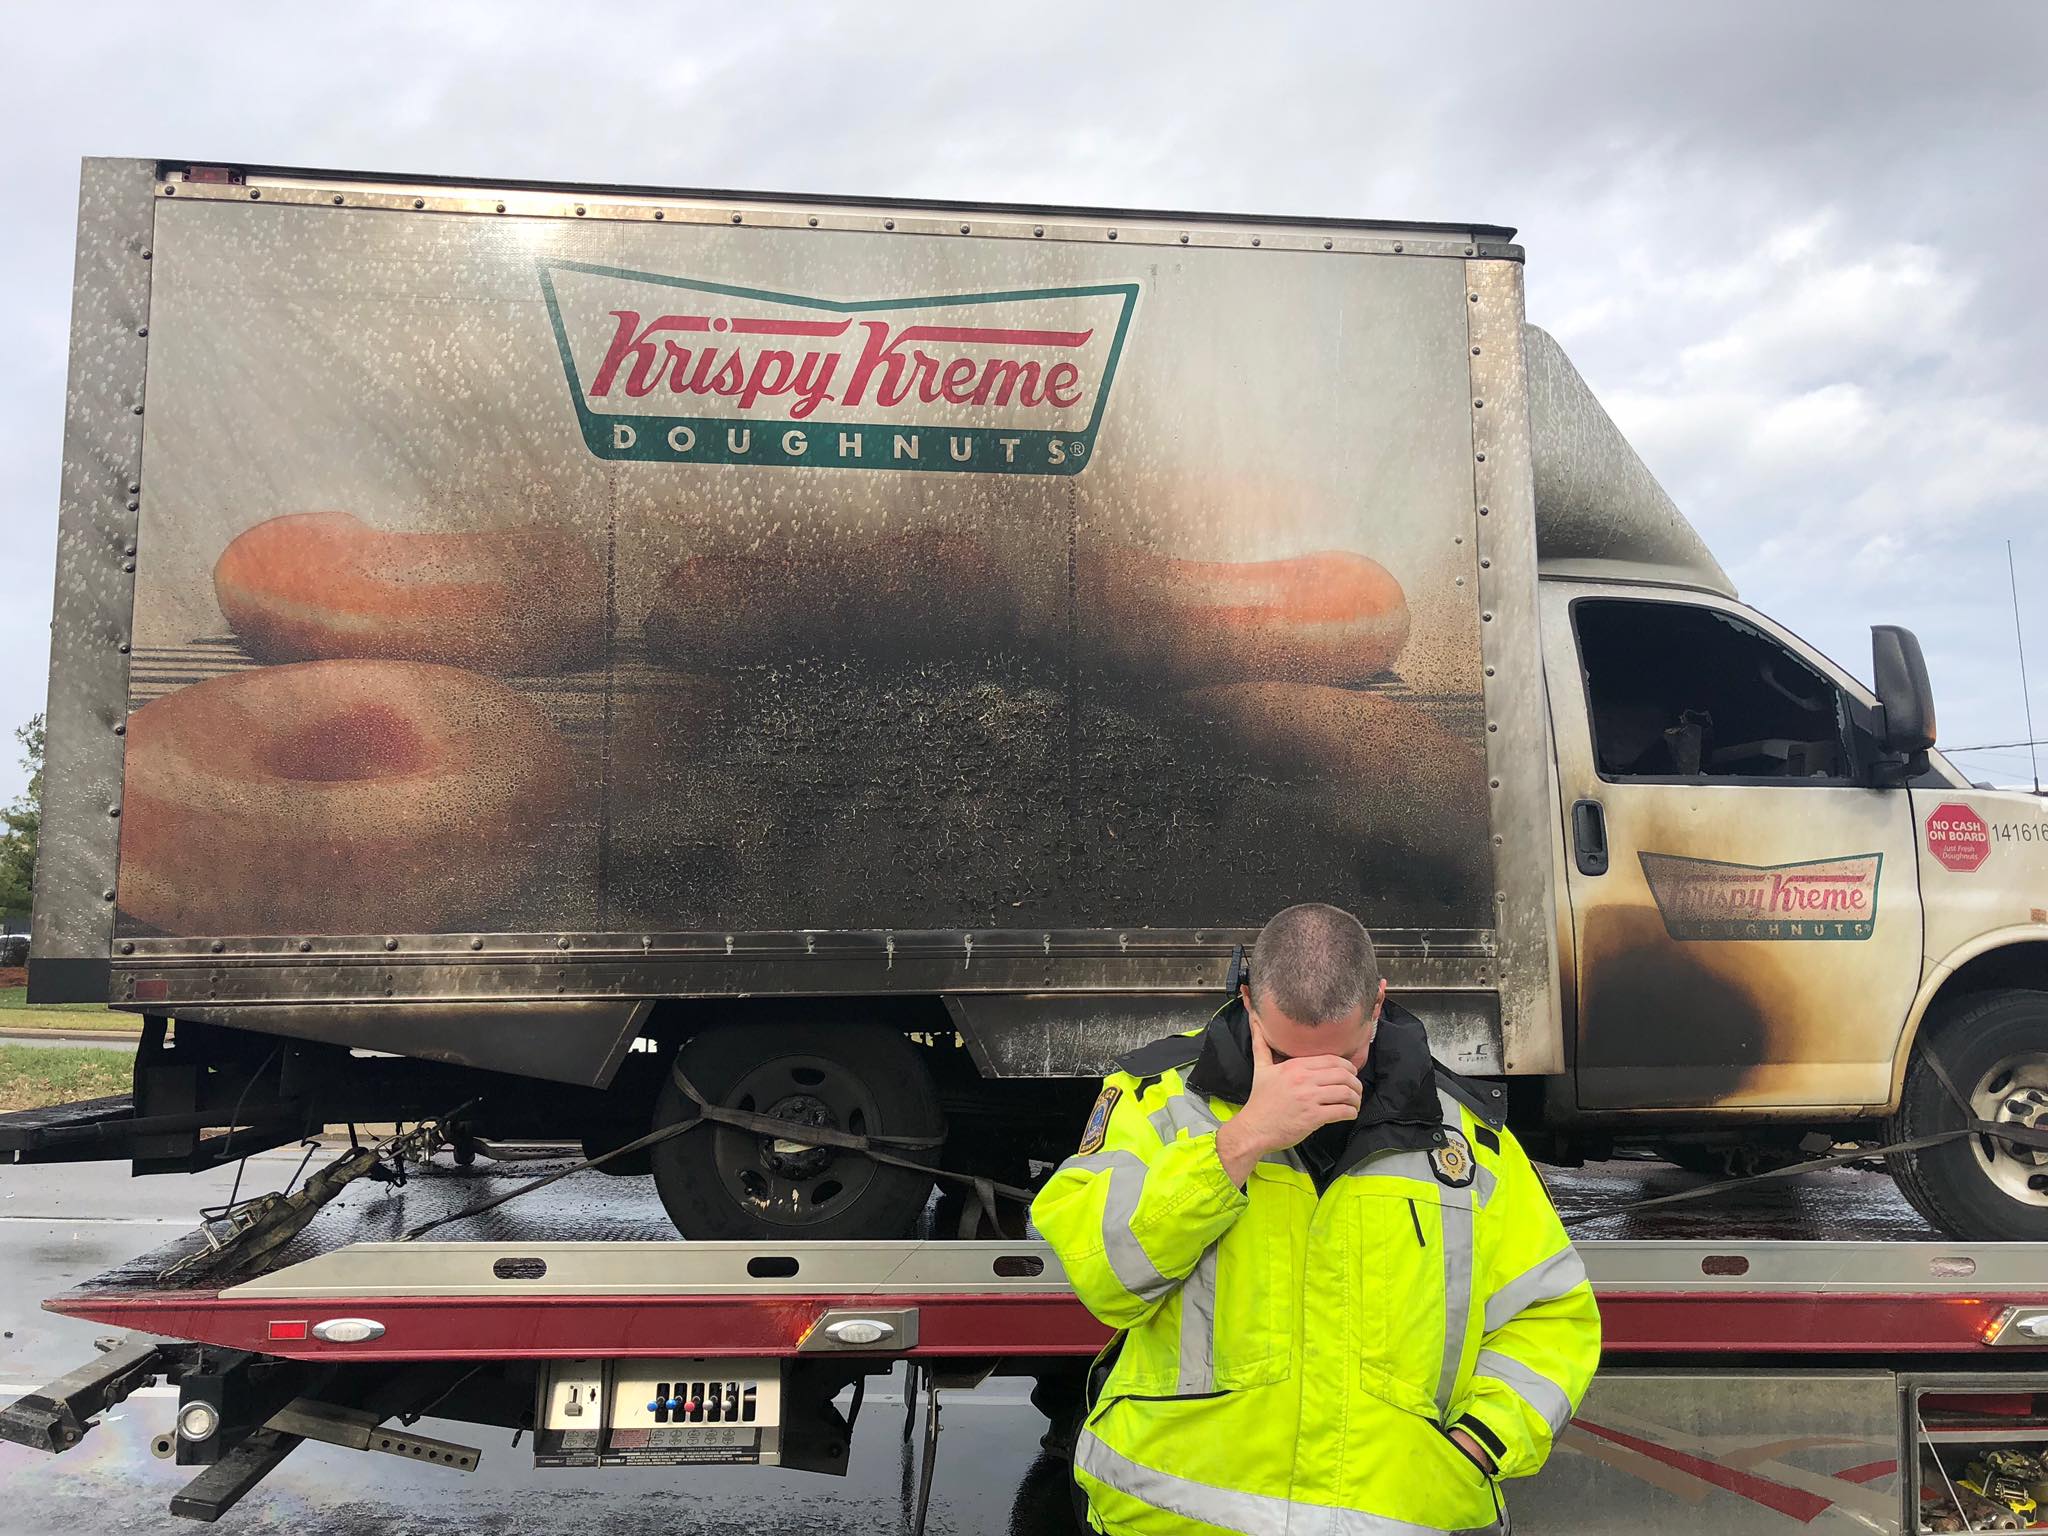 A police officer reacts to a Krispy Kreme truck that caught on fire in Lexington, Ky., on Dec. 31. Nobody was hurt, but local officers had fun on twitter after the incident. (Lexington Police Department)